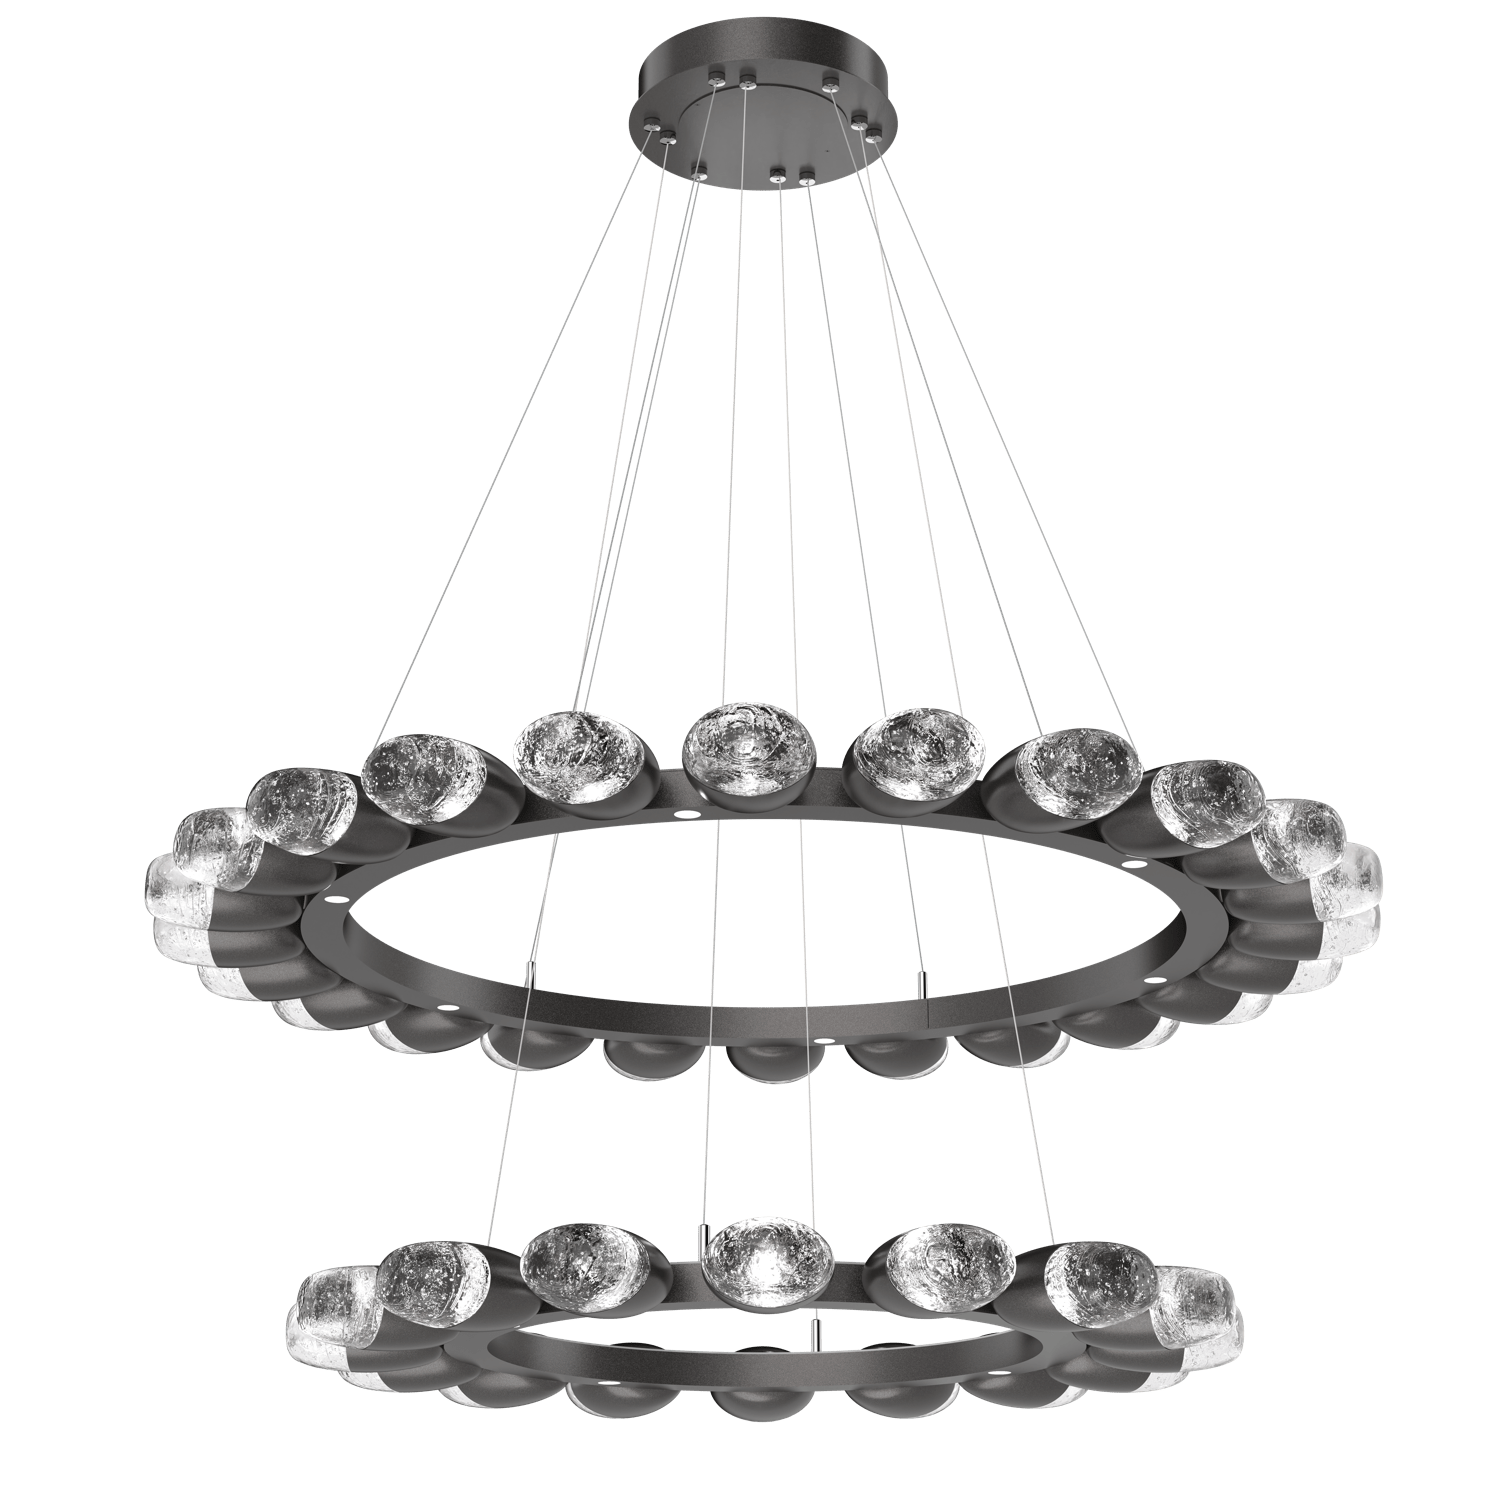 CHB0079-2T-GP-Hammerton-Studio-Pebble-48-inch-two-tier-radial-ring-chandelier-with-graphite-finish-and-clear-cast-glass-shades-and-LED-lamping